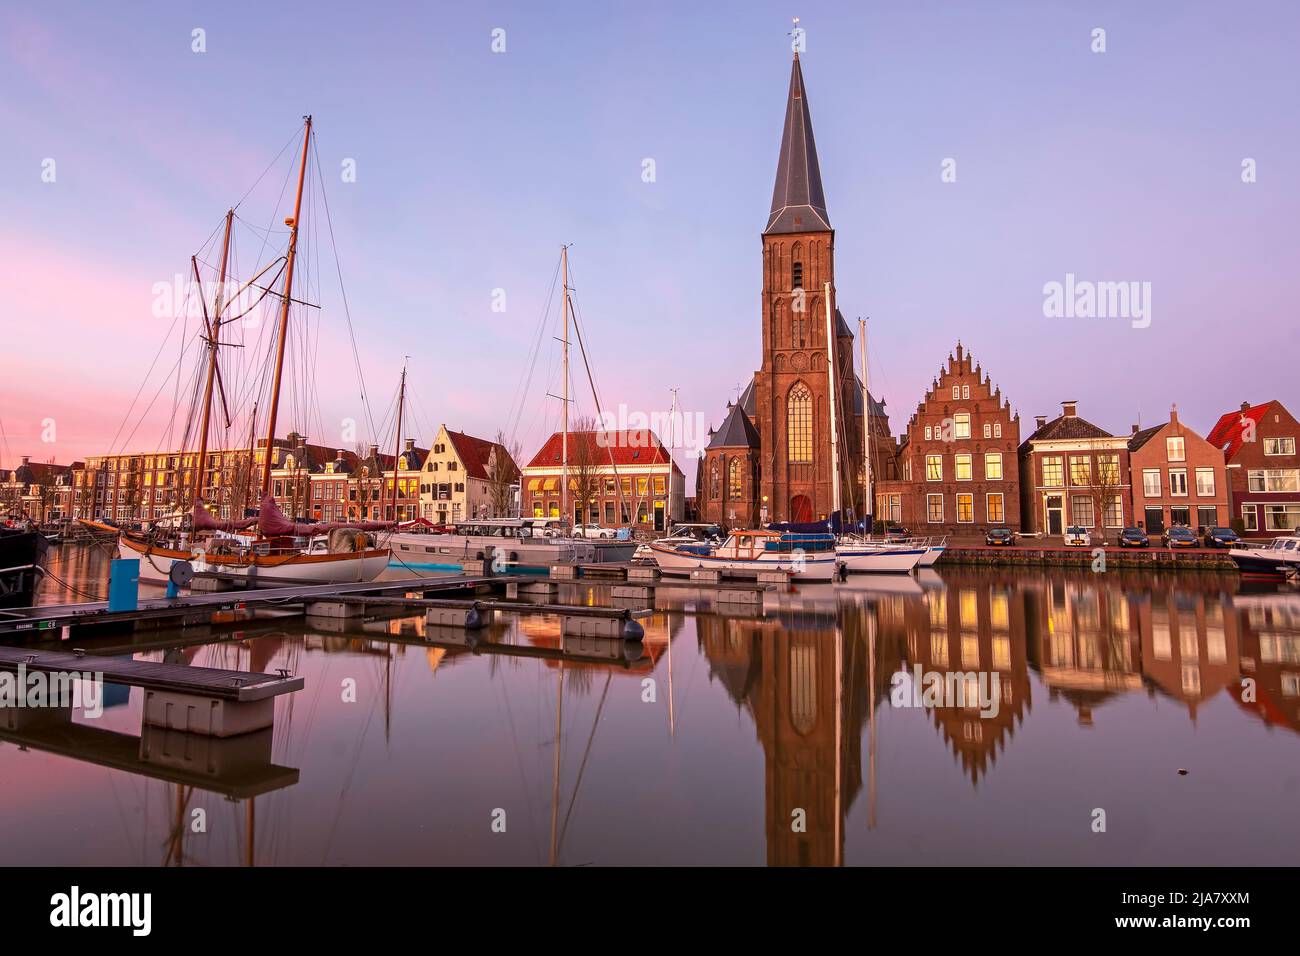 View on St. Michaels church in the city Harlingen in Friesland the Netherlands at sunset Stock Photo